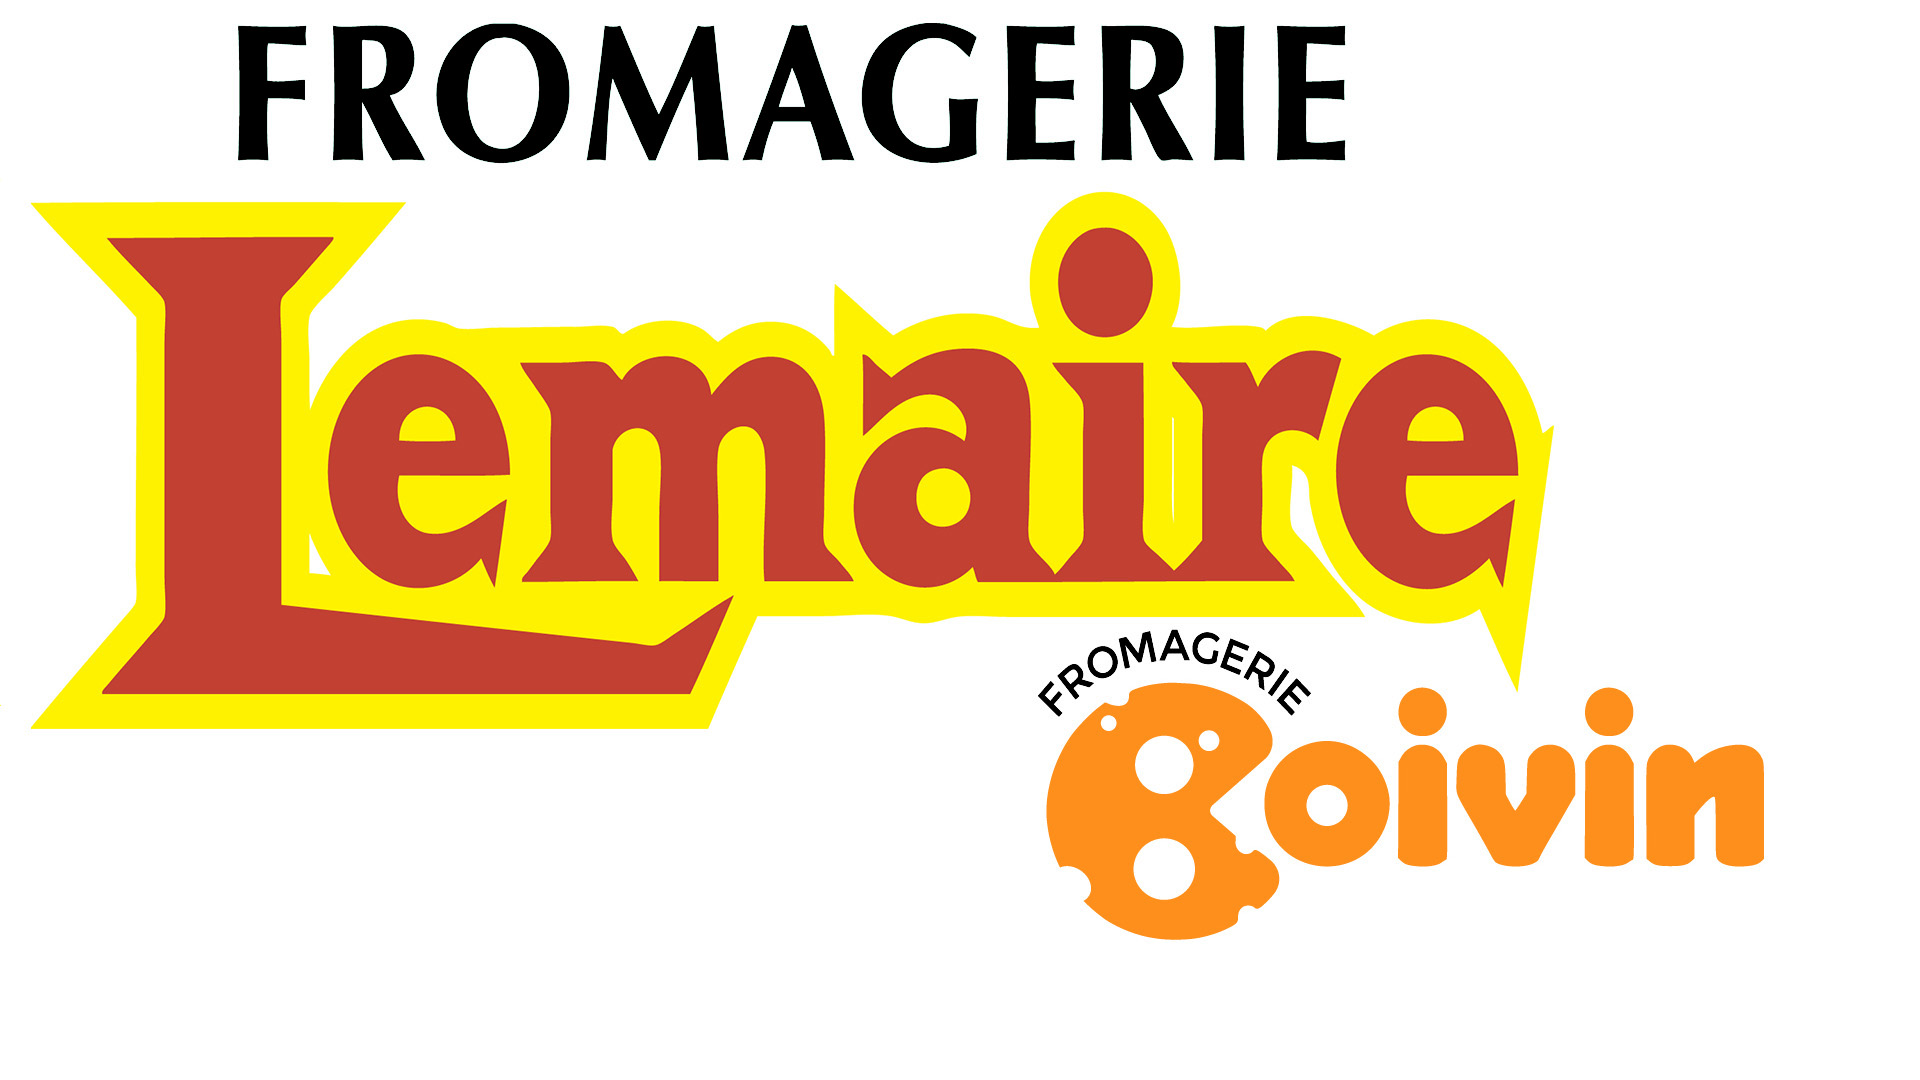 Fromagerie Lemaire